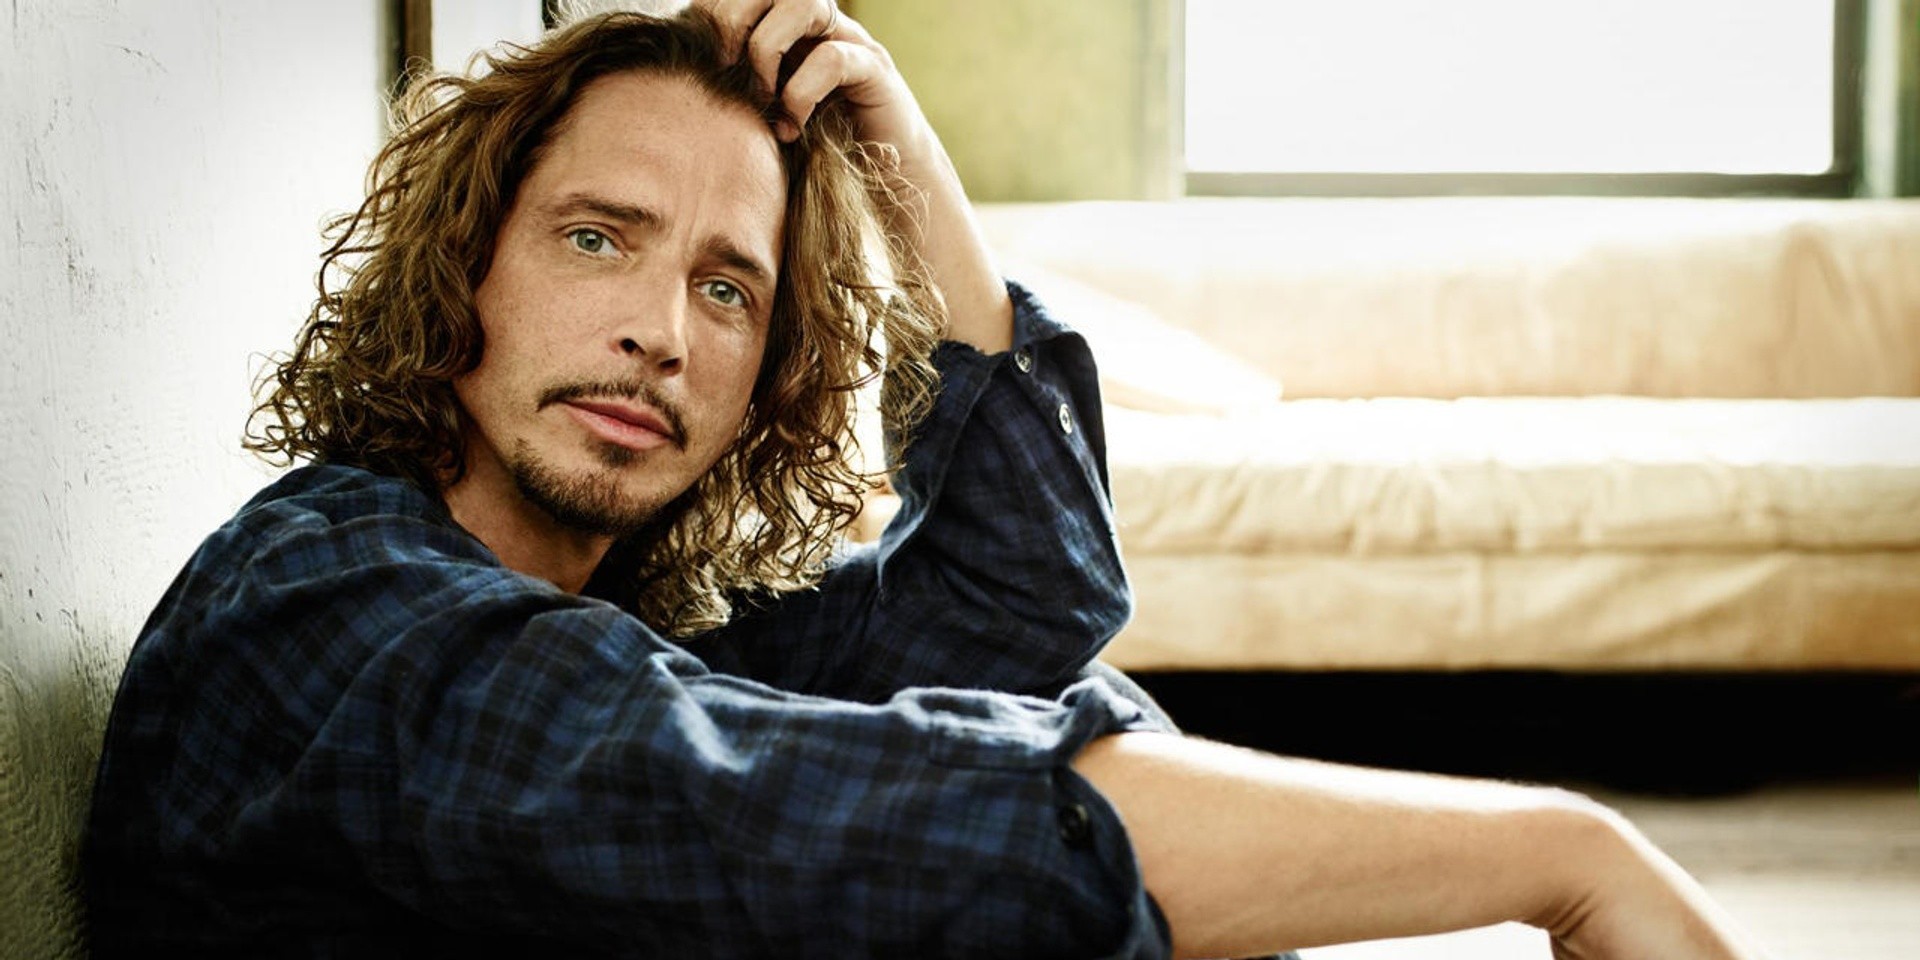 Chris Cornell, frontman of Soundgarden and Audioslave, has passed away